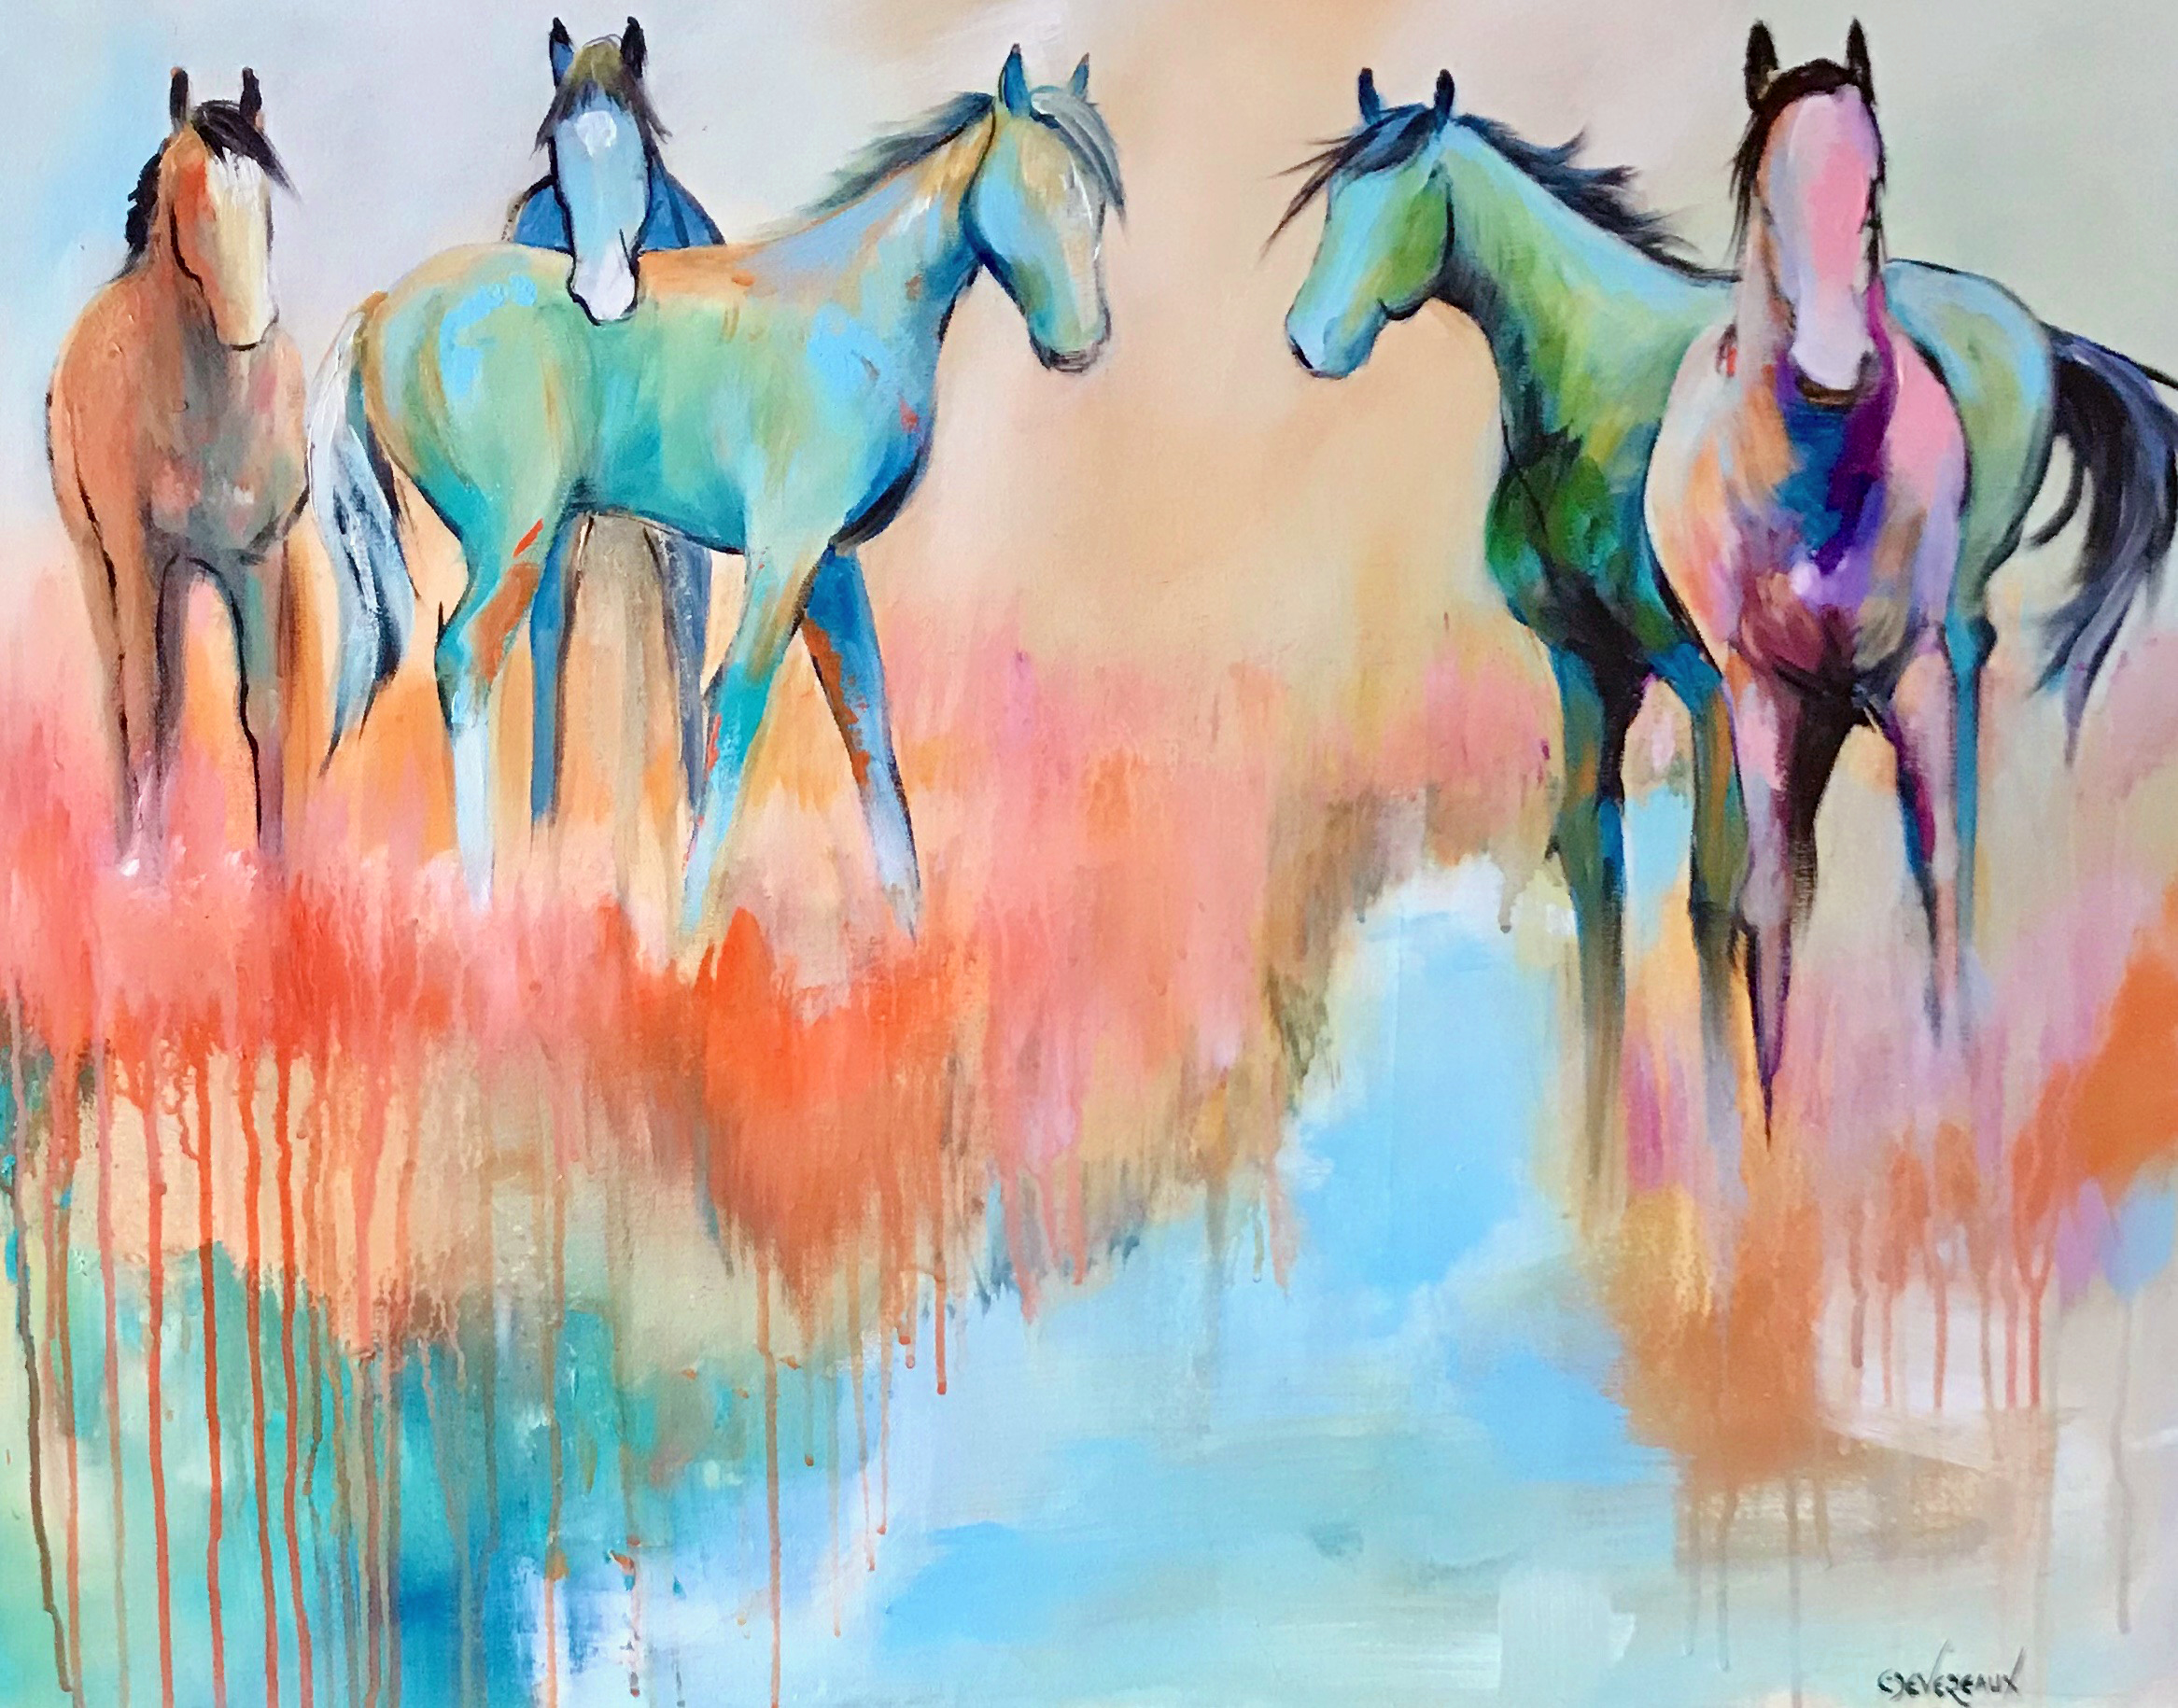 'Creek' 24x30 in  contemporary modern equine, horse painting by Cher Devereaux on stretched canvas.